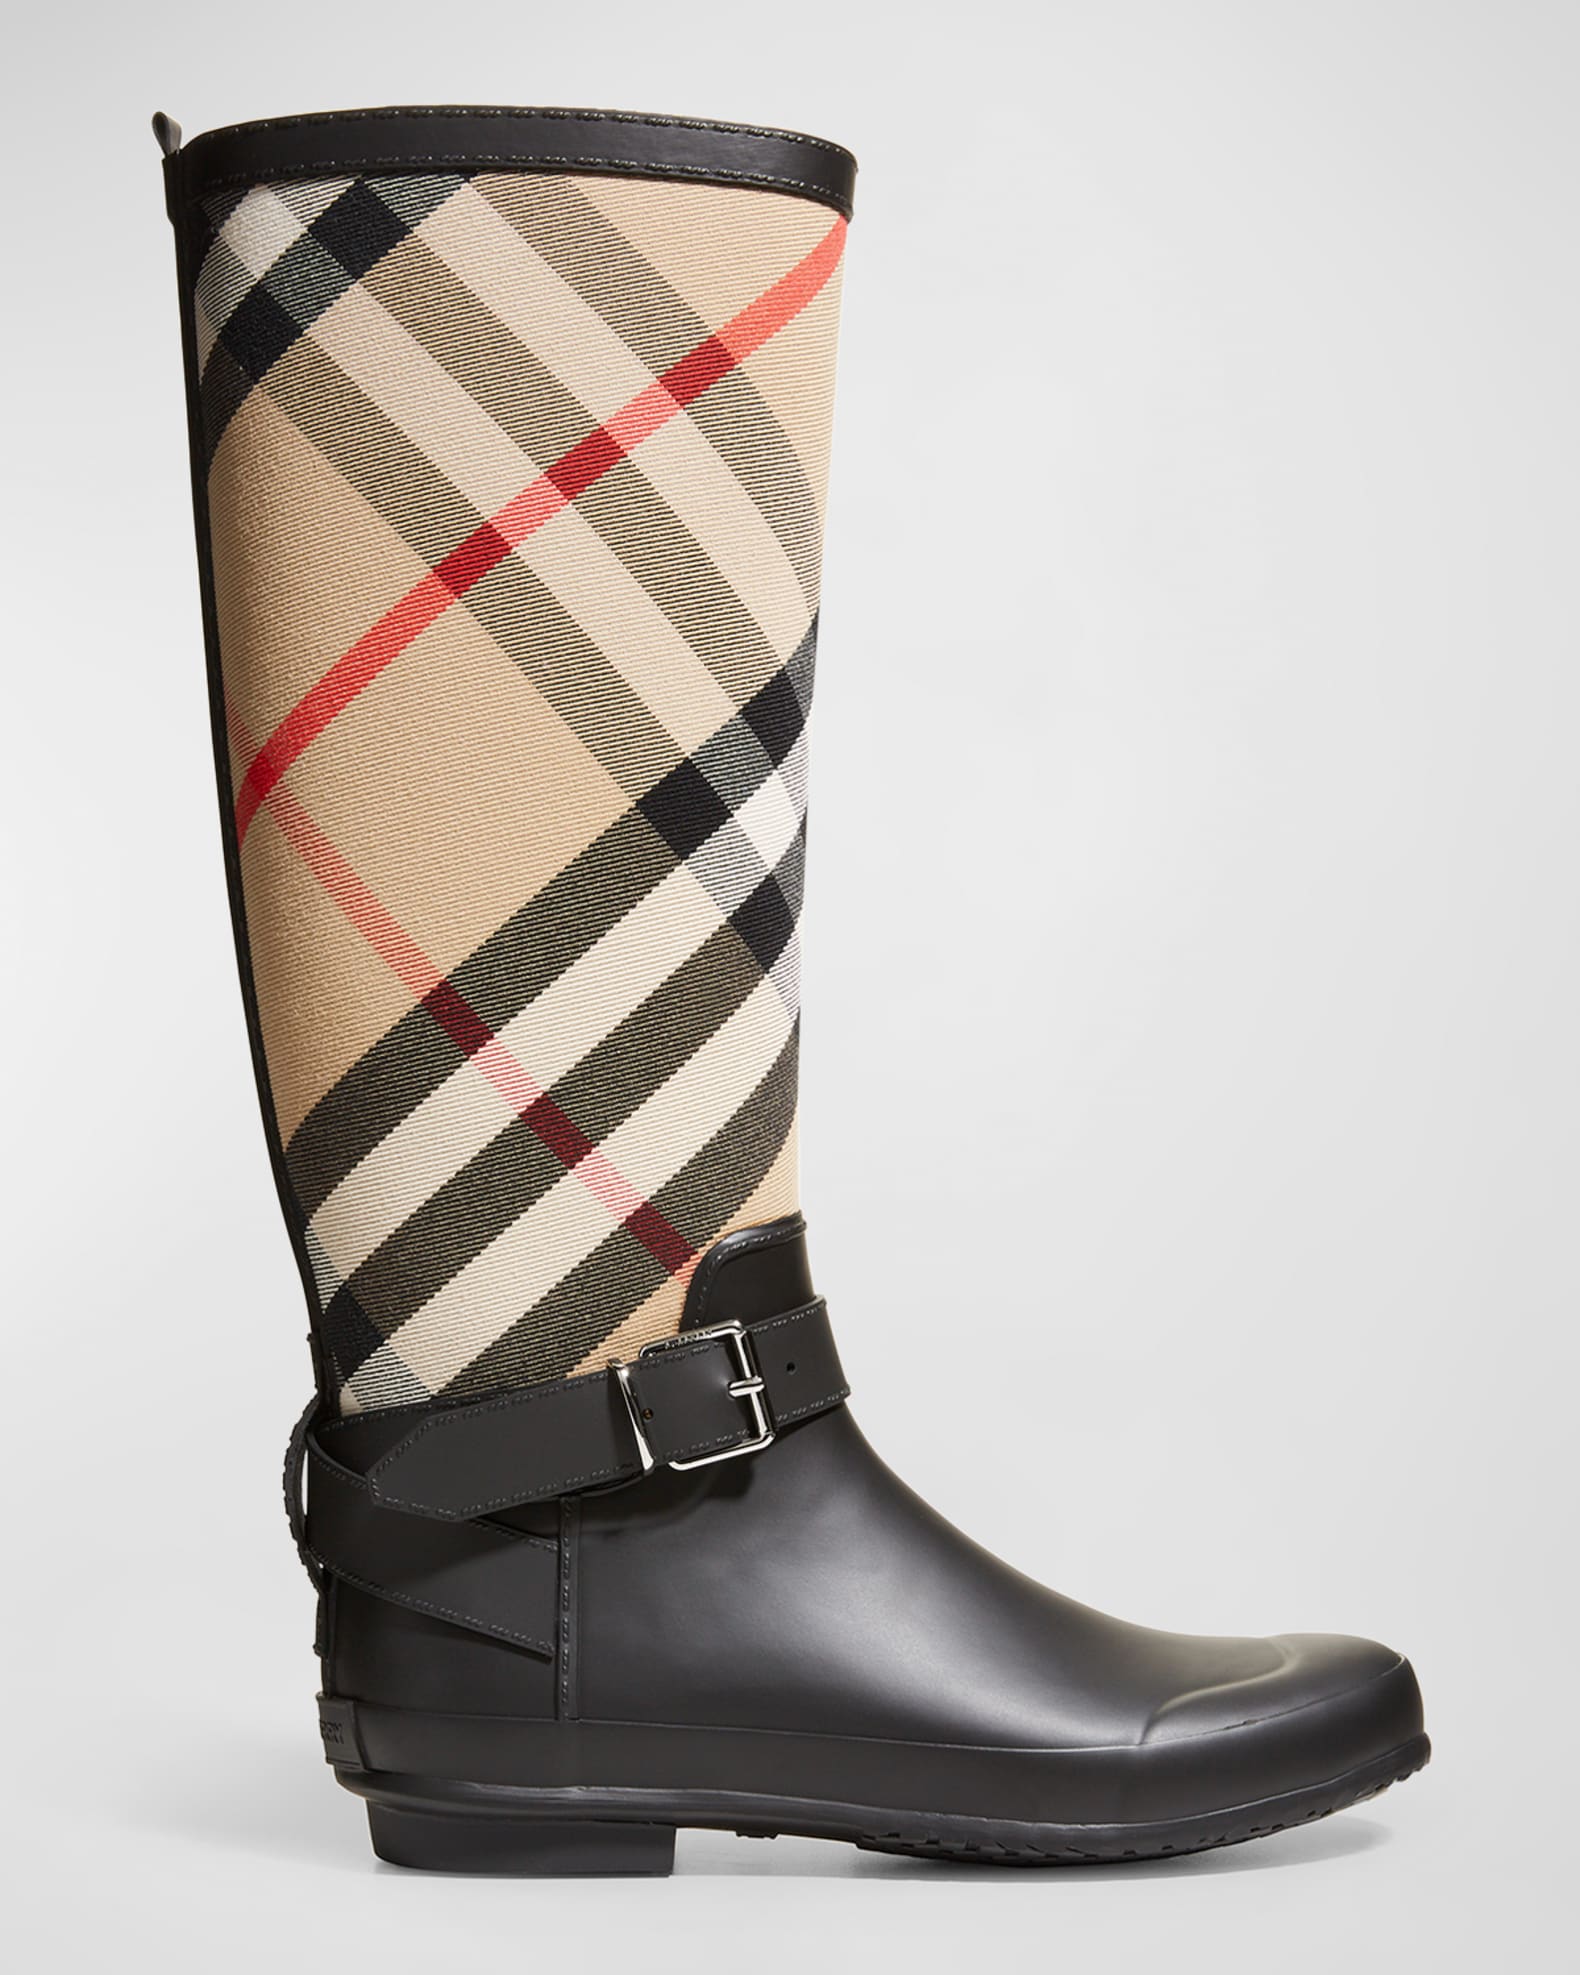 Rev Up Your Style: Burberry Motorcycle Rain Boots